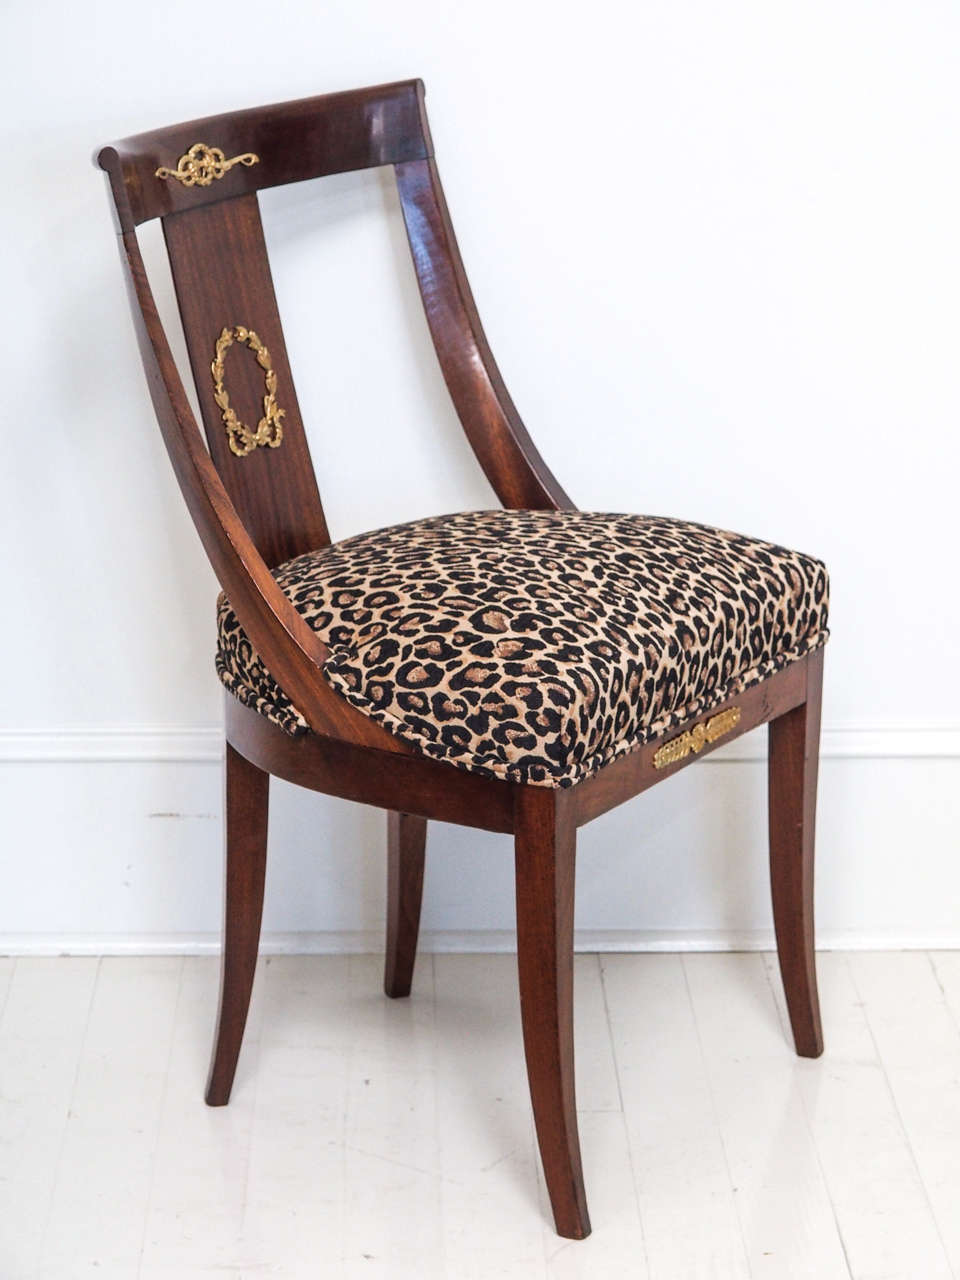 Beautifully restored gilt bronze-mounted walnut chair, Second Empire period (Napoleon III). Newly upholstered in a modern animal print. Perfect on its own as an accent piece or as a desk chair. This piece has been painstakingly restored and